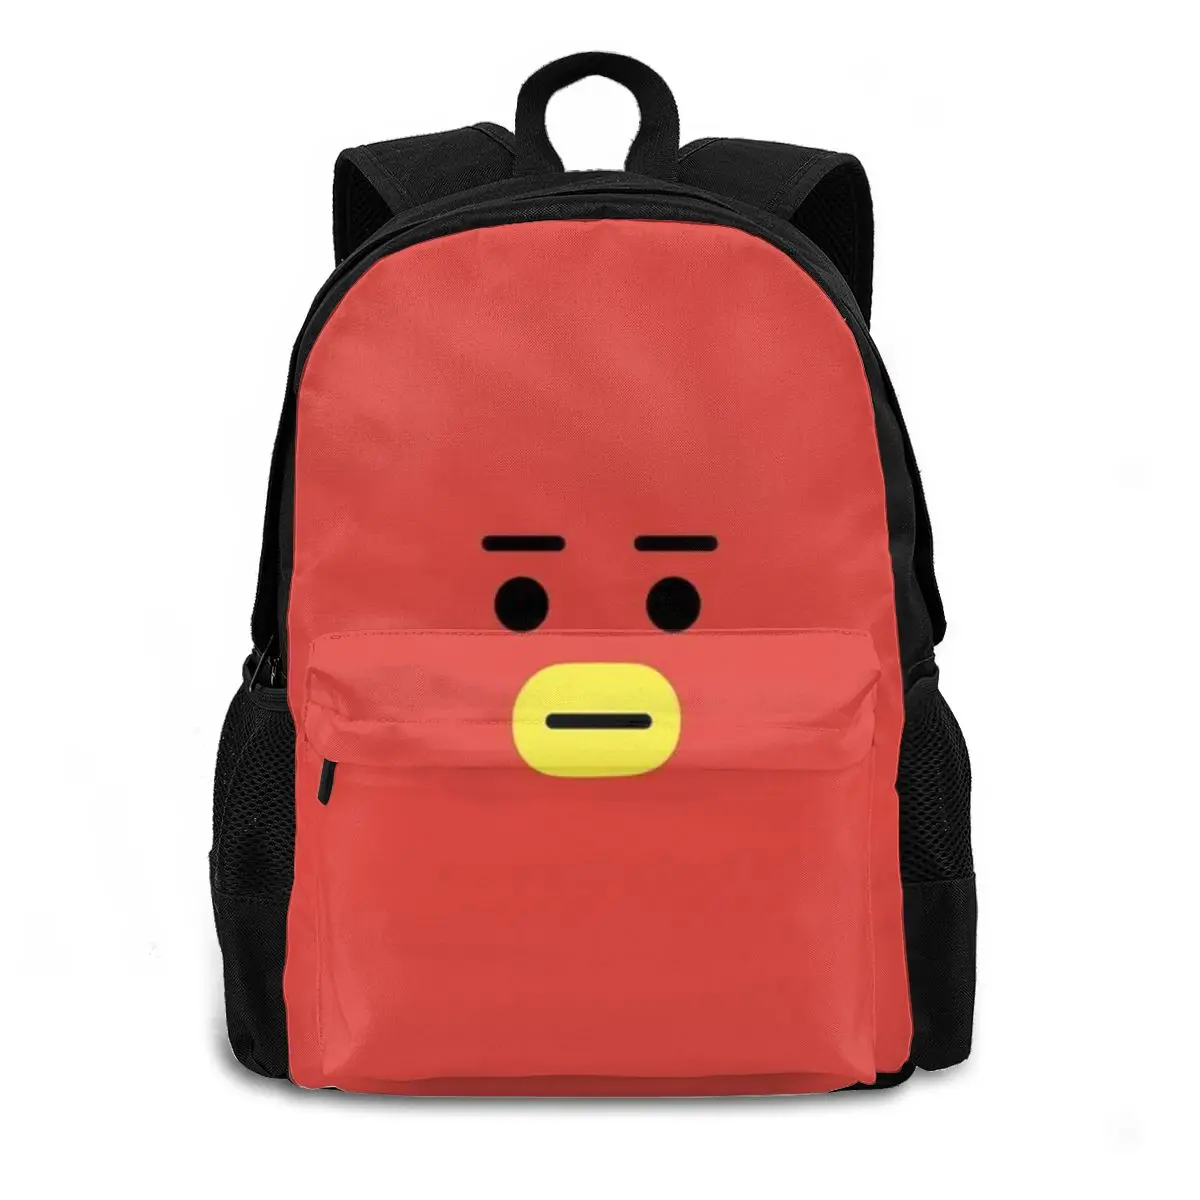 

Game Anime Kawaii Backpack Team Impostor Sus Sussy Amogus Backpack High quality Bag Schoolbag for Man Woman